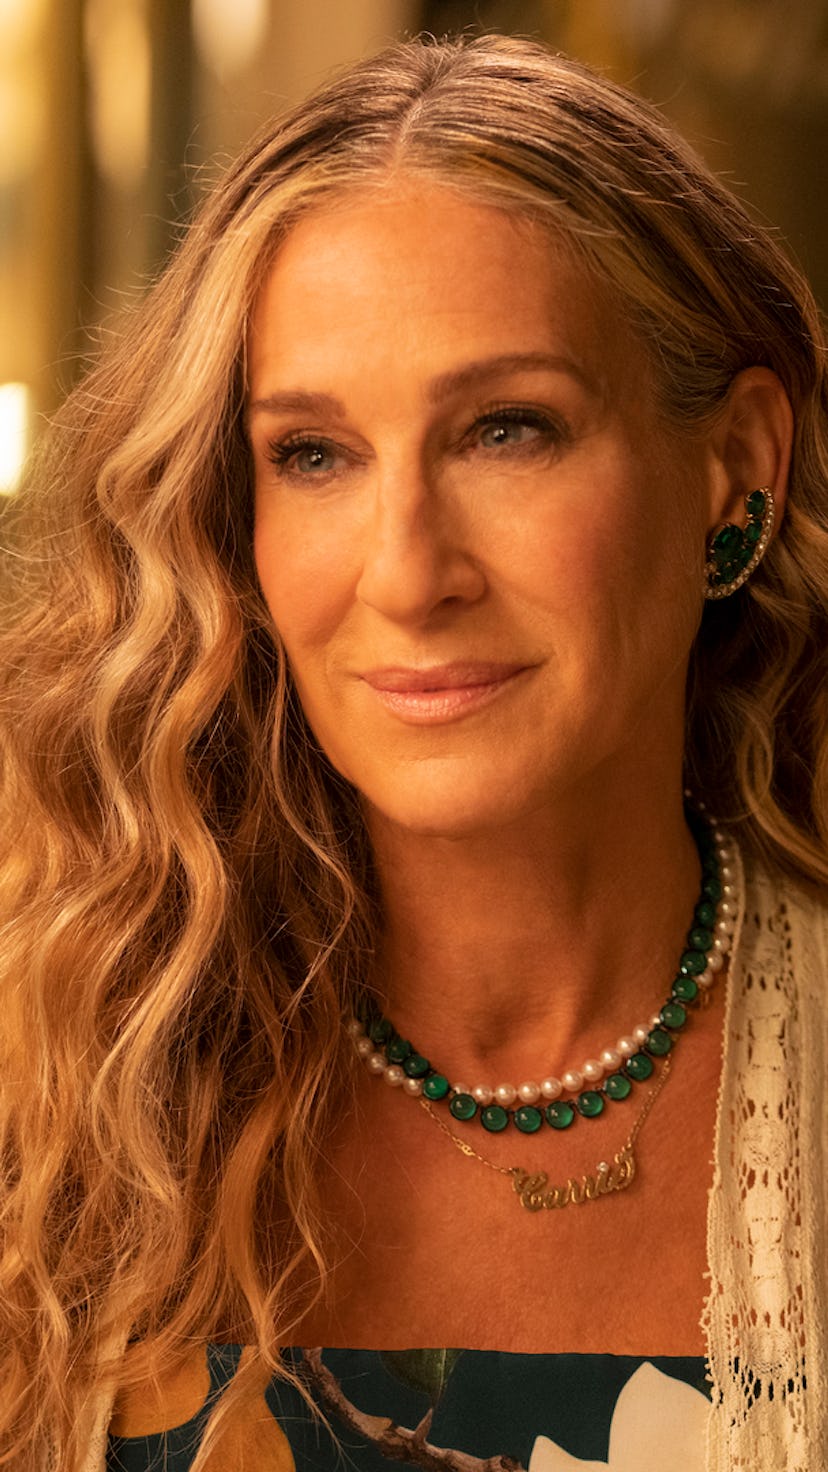 Sarah Jessica Parker in episode 10 of 'And Just Like That...'. 